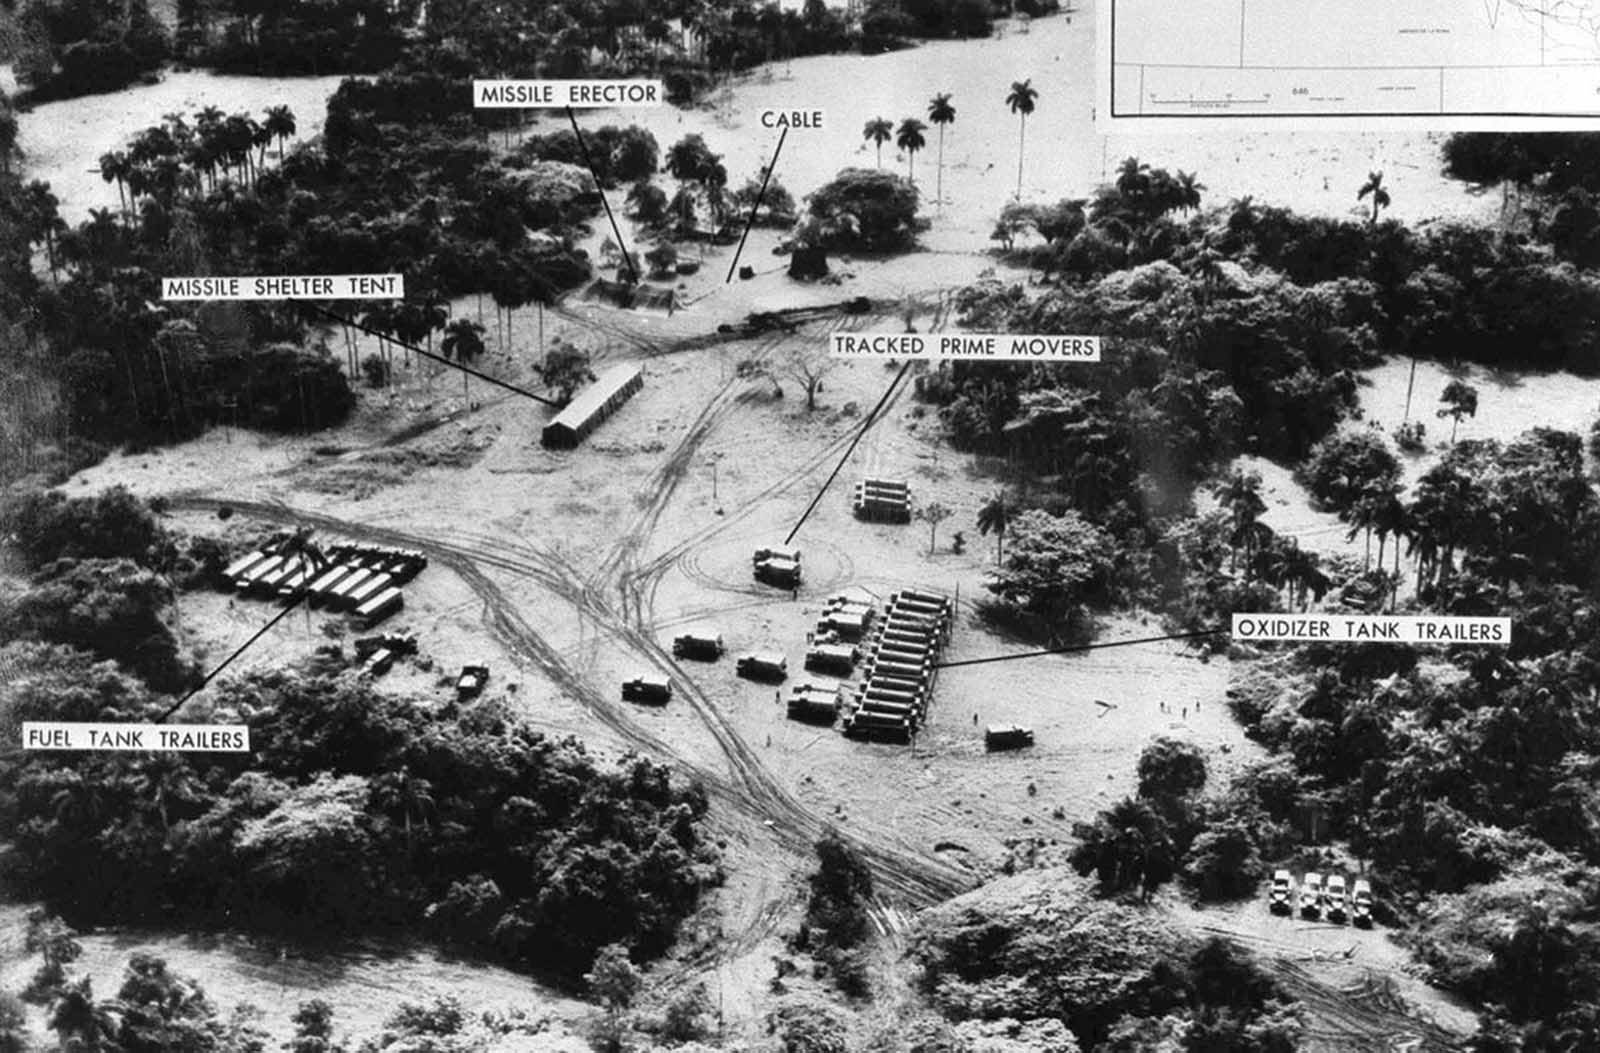 Evidence presented by the U.S. Department of Defense, of Soviet missiles in Cuba. This low level photo, made October 23, 1962, of the medium range ballistic missile site under construction at Cuba’s San Cristobal area. A line of oxidizer trailers is at center. Added since October 14, the site was earlier photographed, are fuel trailers, a missile shelter tent, and equipment. The missile erector now lies under canvas cover. Evident also are extensive vehicle tracks and the construction of cable lines to control areas.